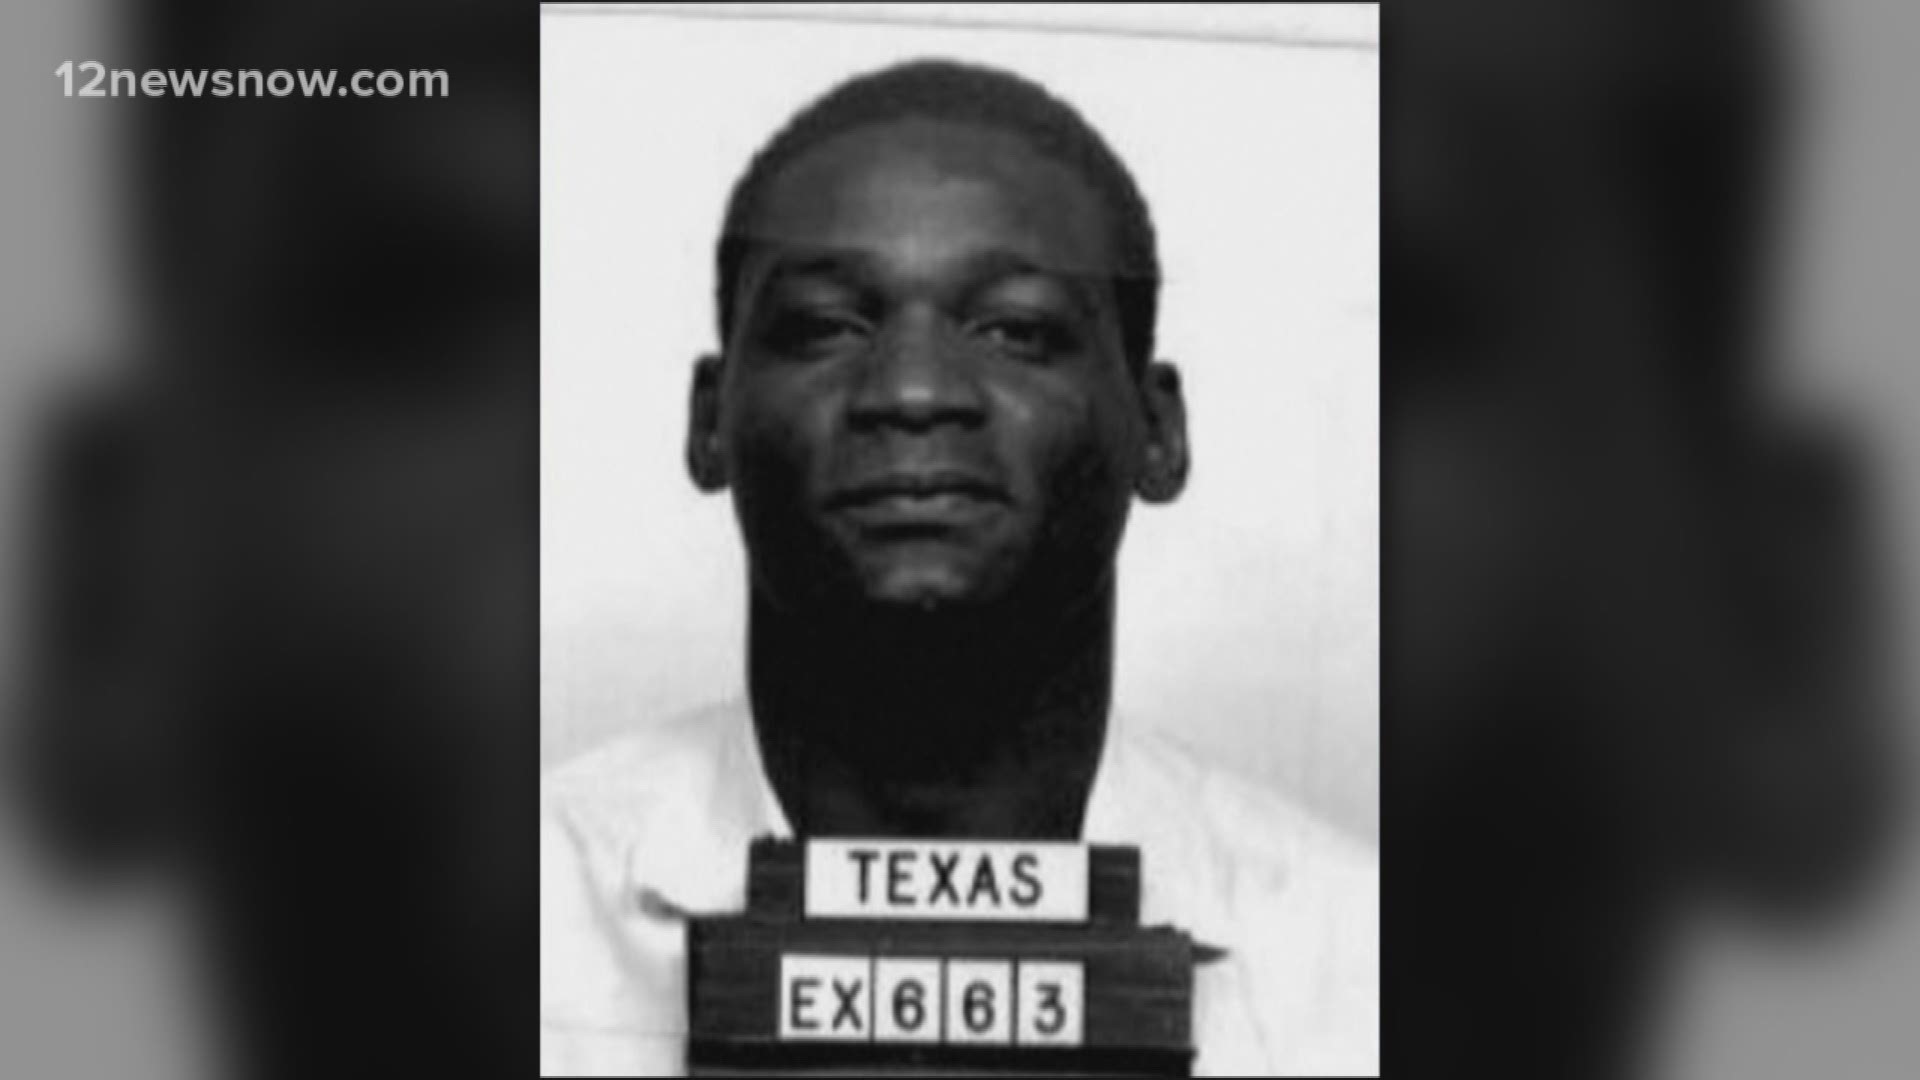 Justices ruled 6-3 today, in the case of Bobby James Moore, who had been sentenced to death for the 1980 shotgun slaying of a Houston grocery store clerk.